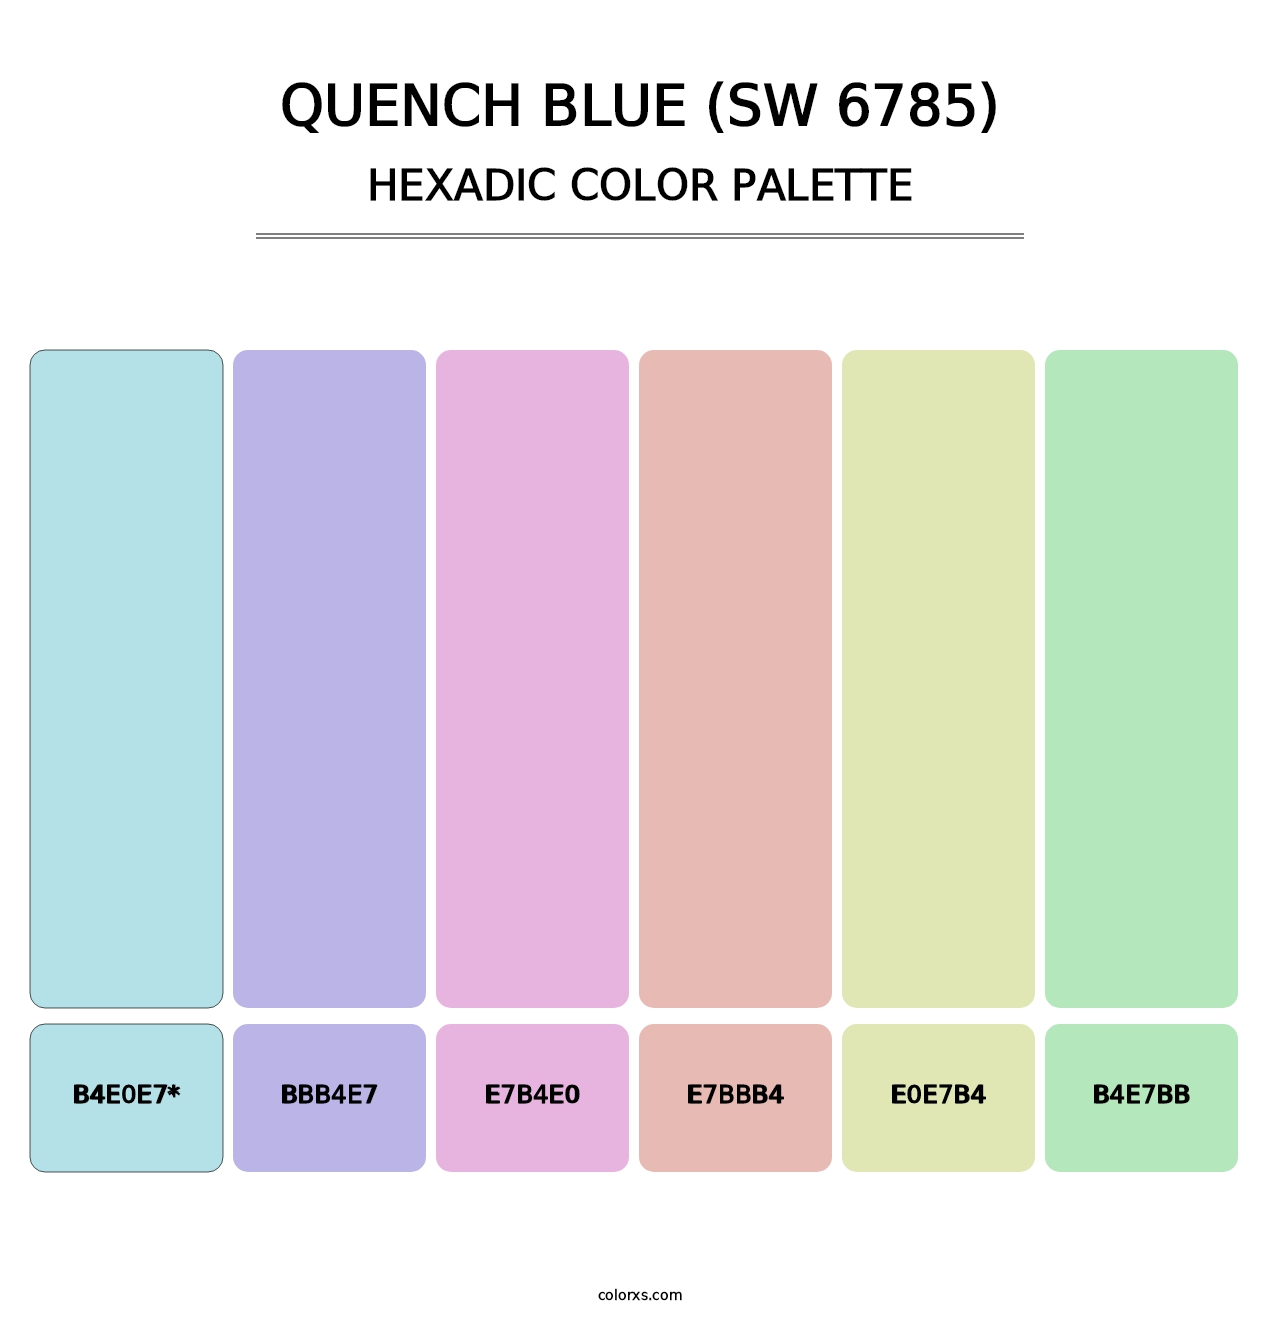 Quench Blue (SW 6785) - Hexadic Color Palette